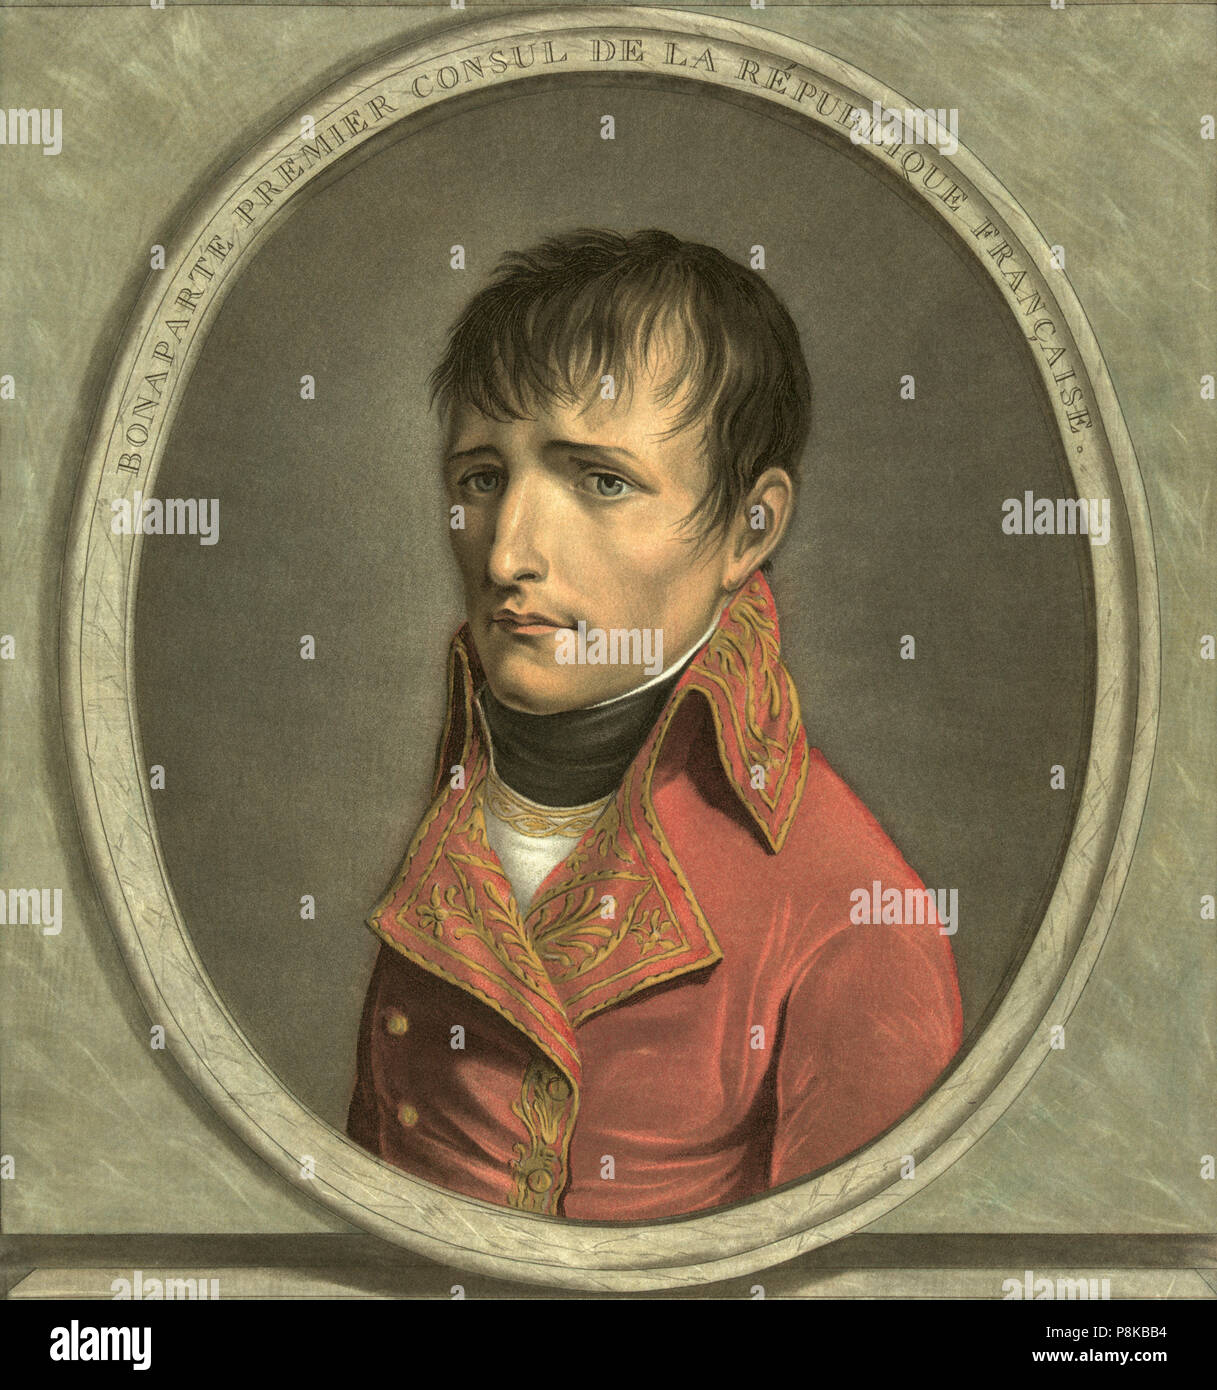 Napoleon Bonaparte, 1769-1821, as first consul of the French Republic.  After a work by Louis Boilly, 1761-1845. Stock Photo